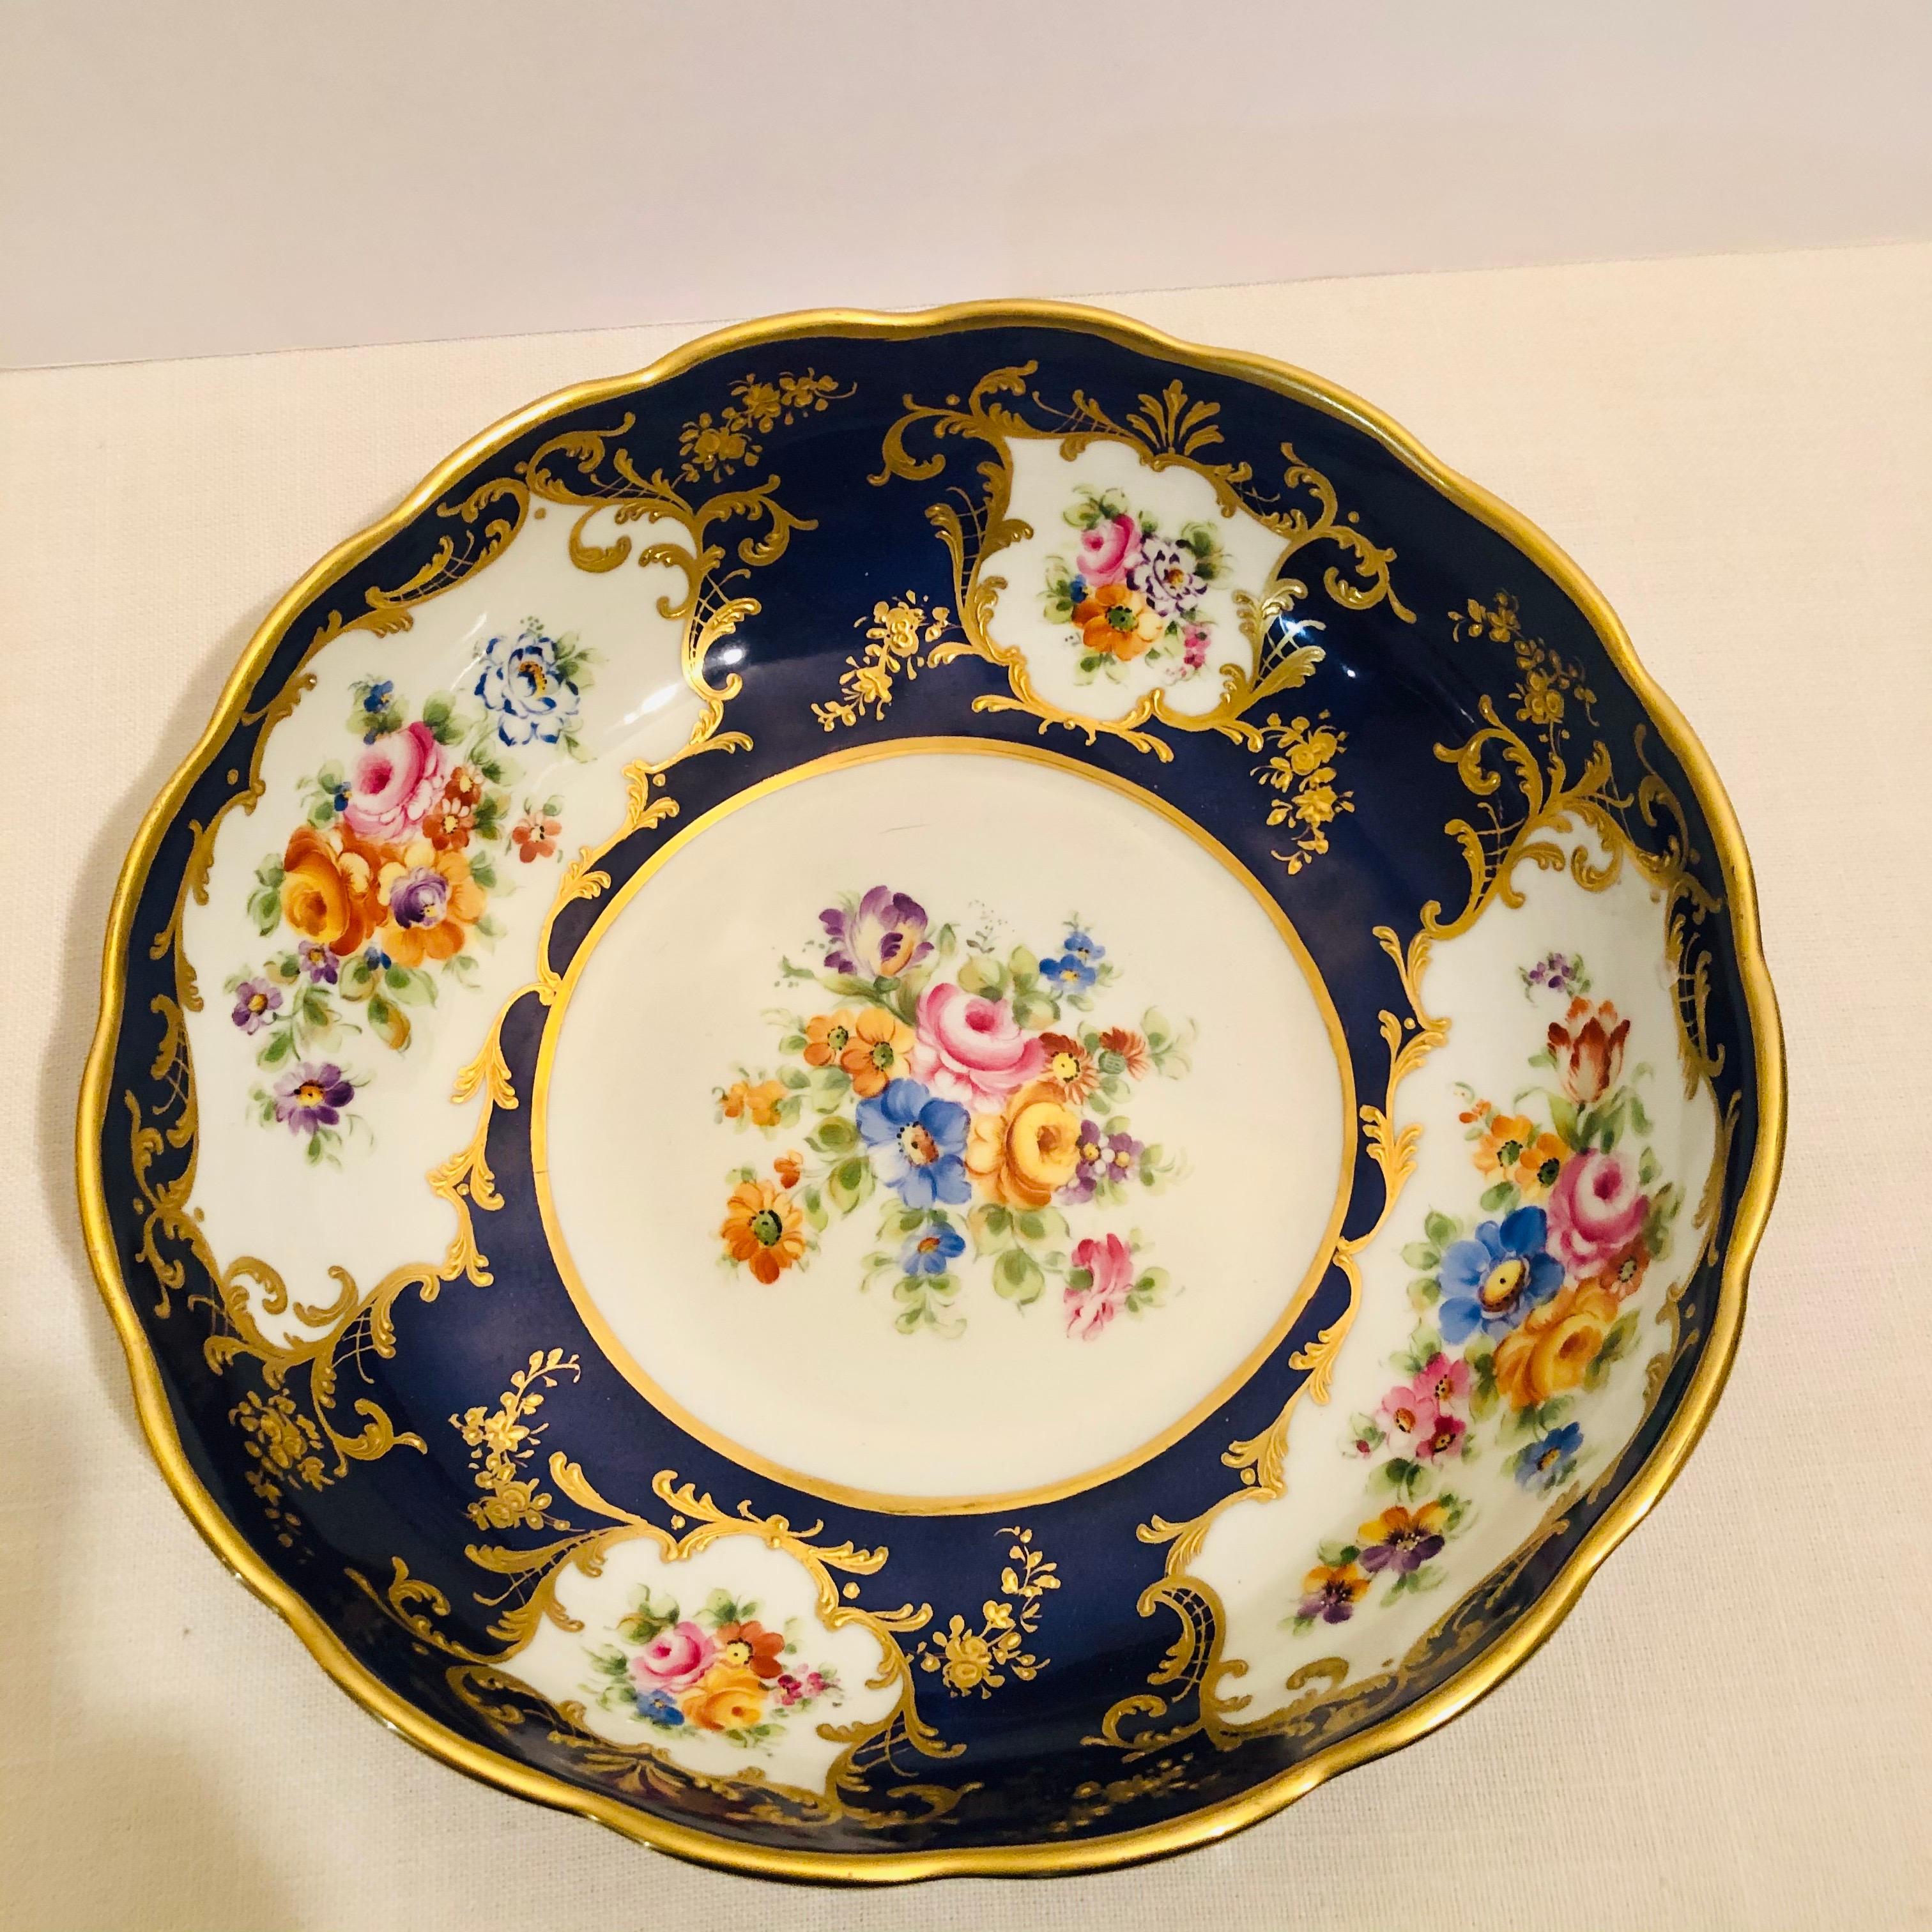 Le Tallec Blue Bowl with Painted Central Flower Bouquet and 4 Flower Medallions 1